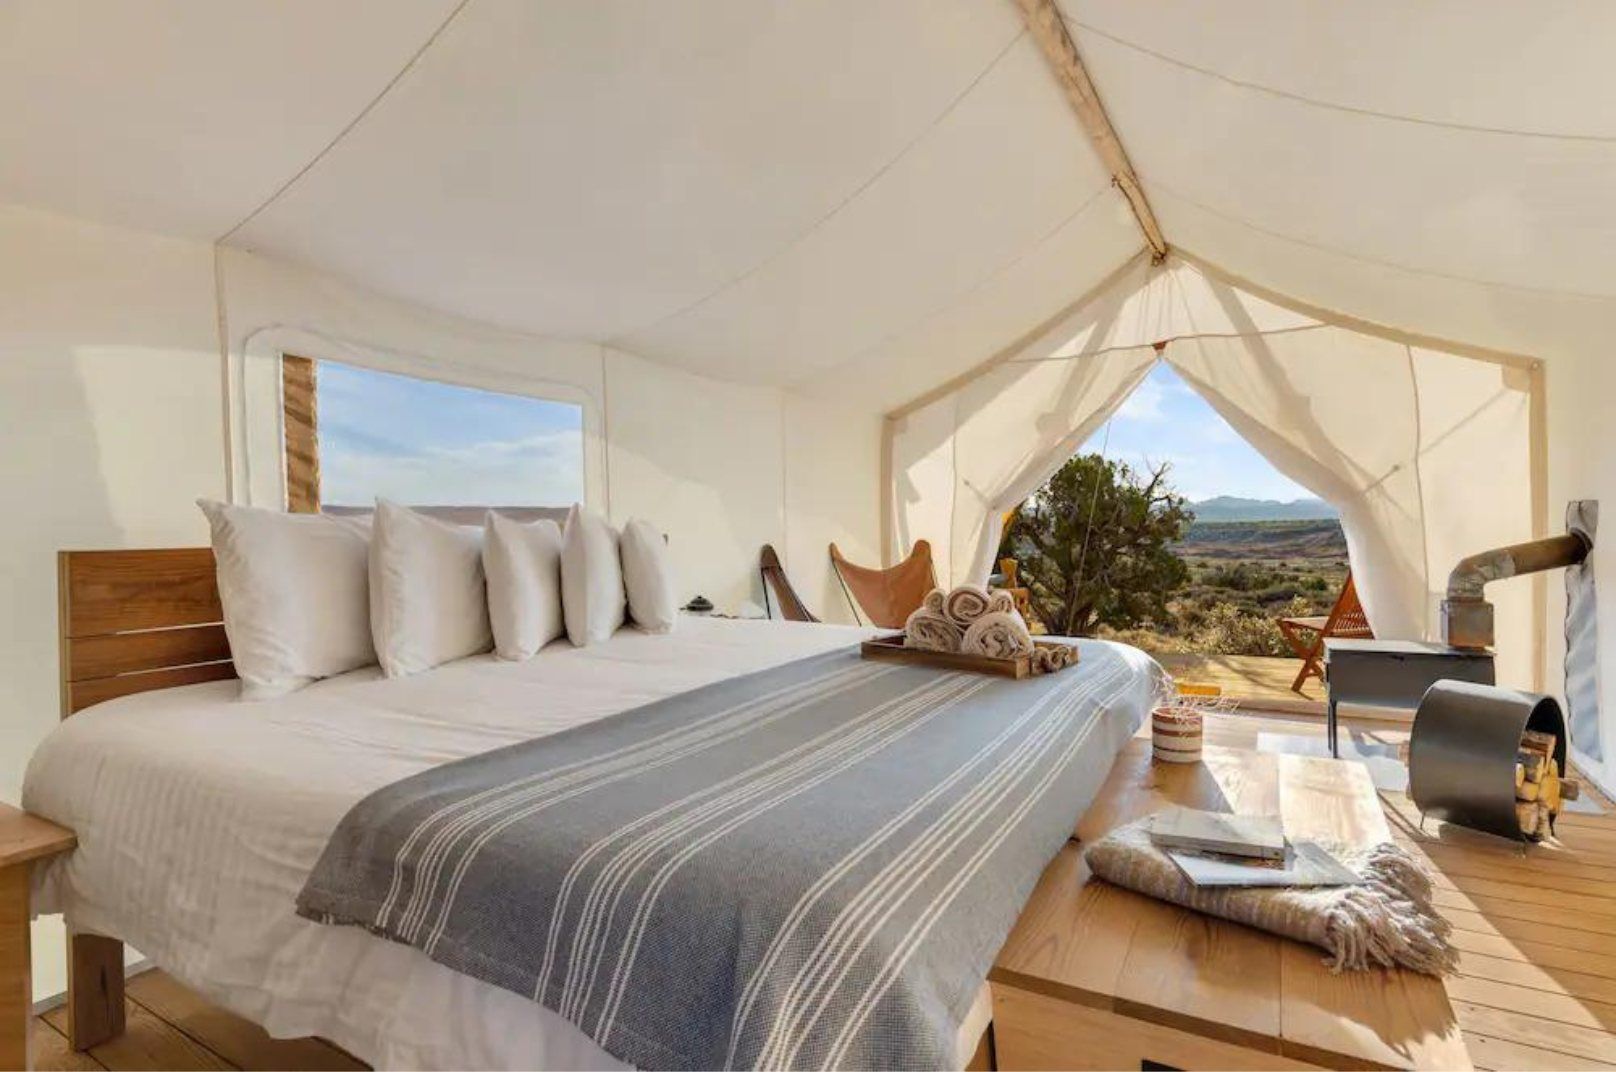 Airbnbs near Canyonlands National Park